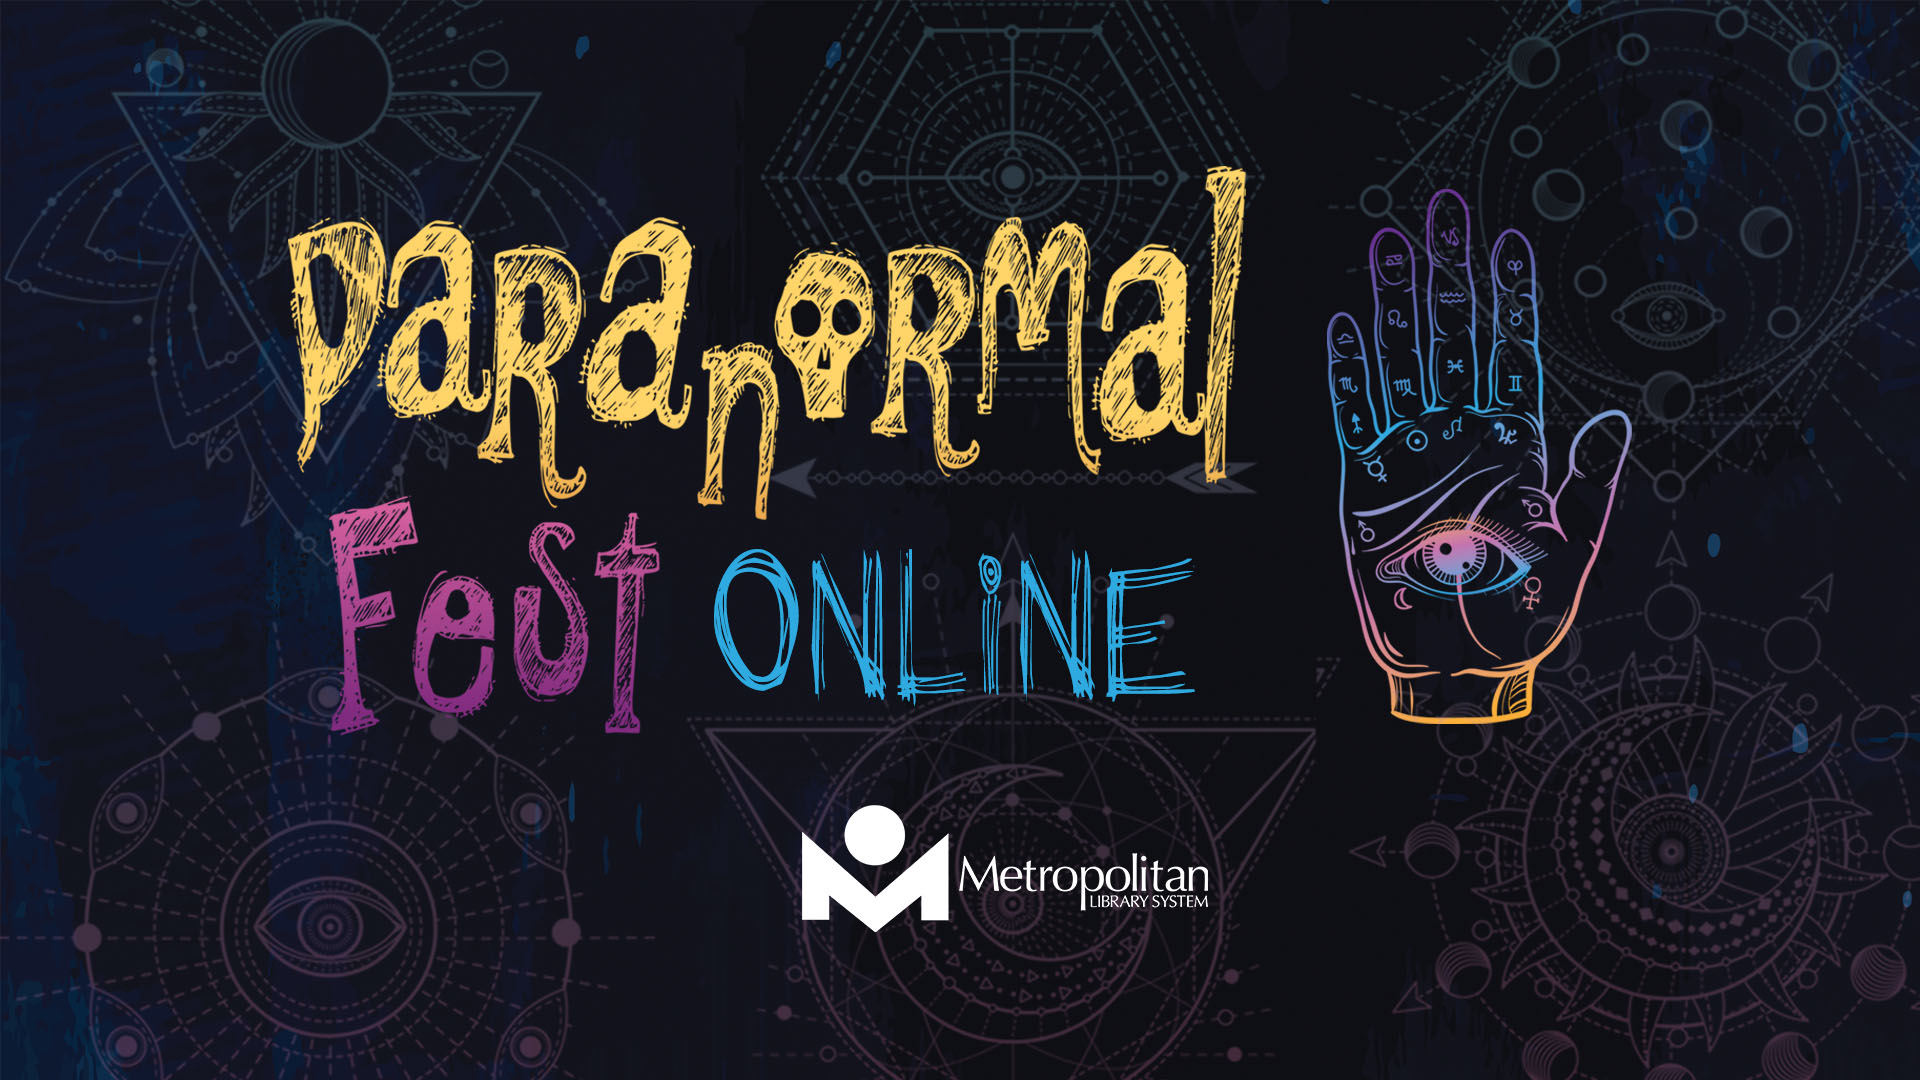 Paranormal Fest Online for the month of October 2020